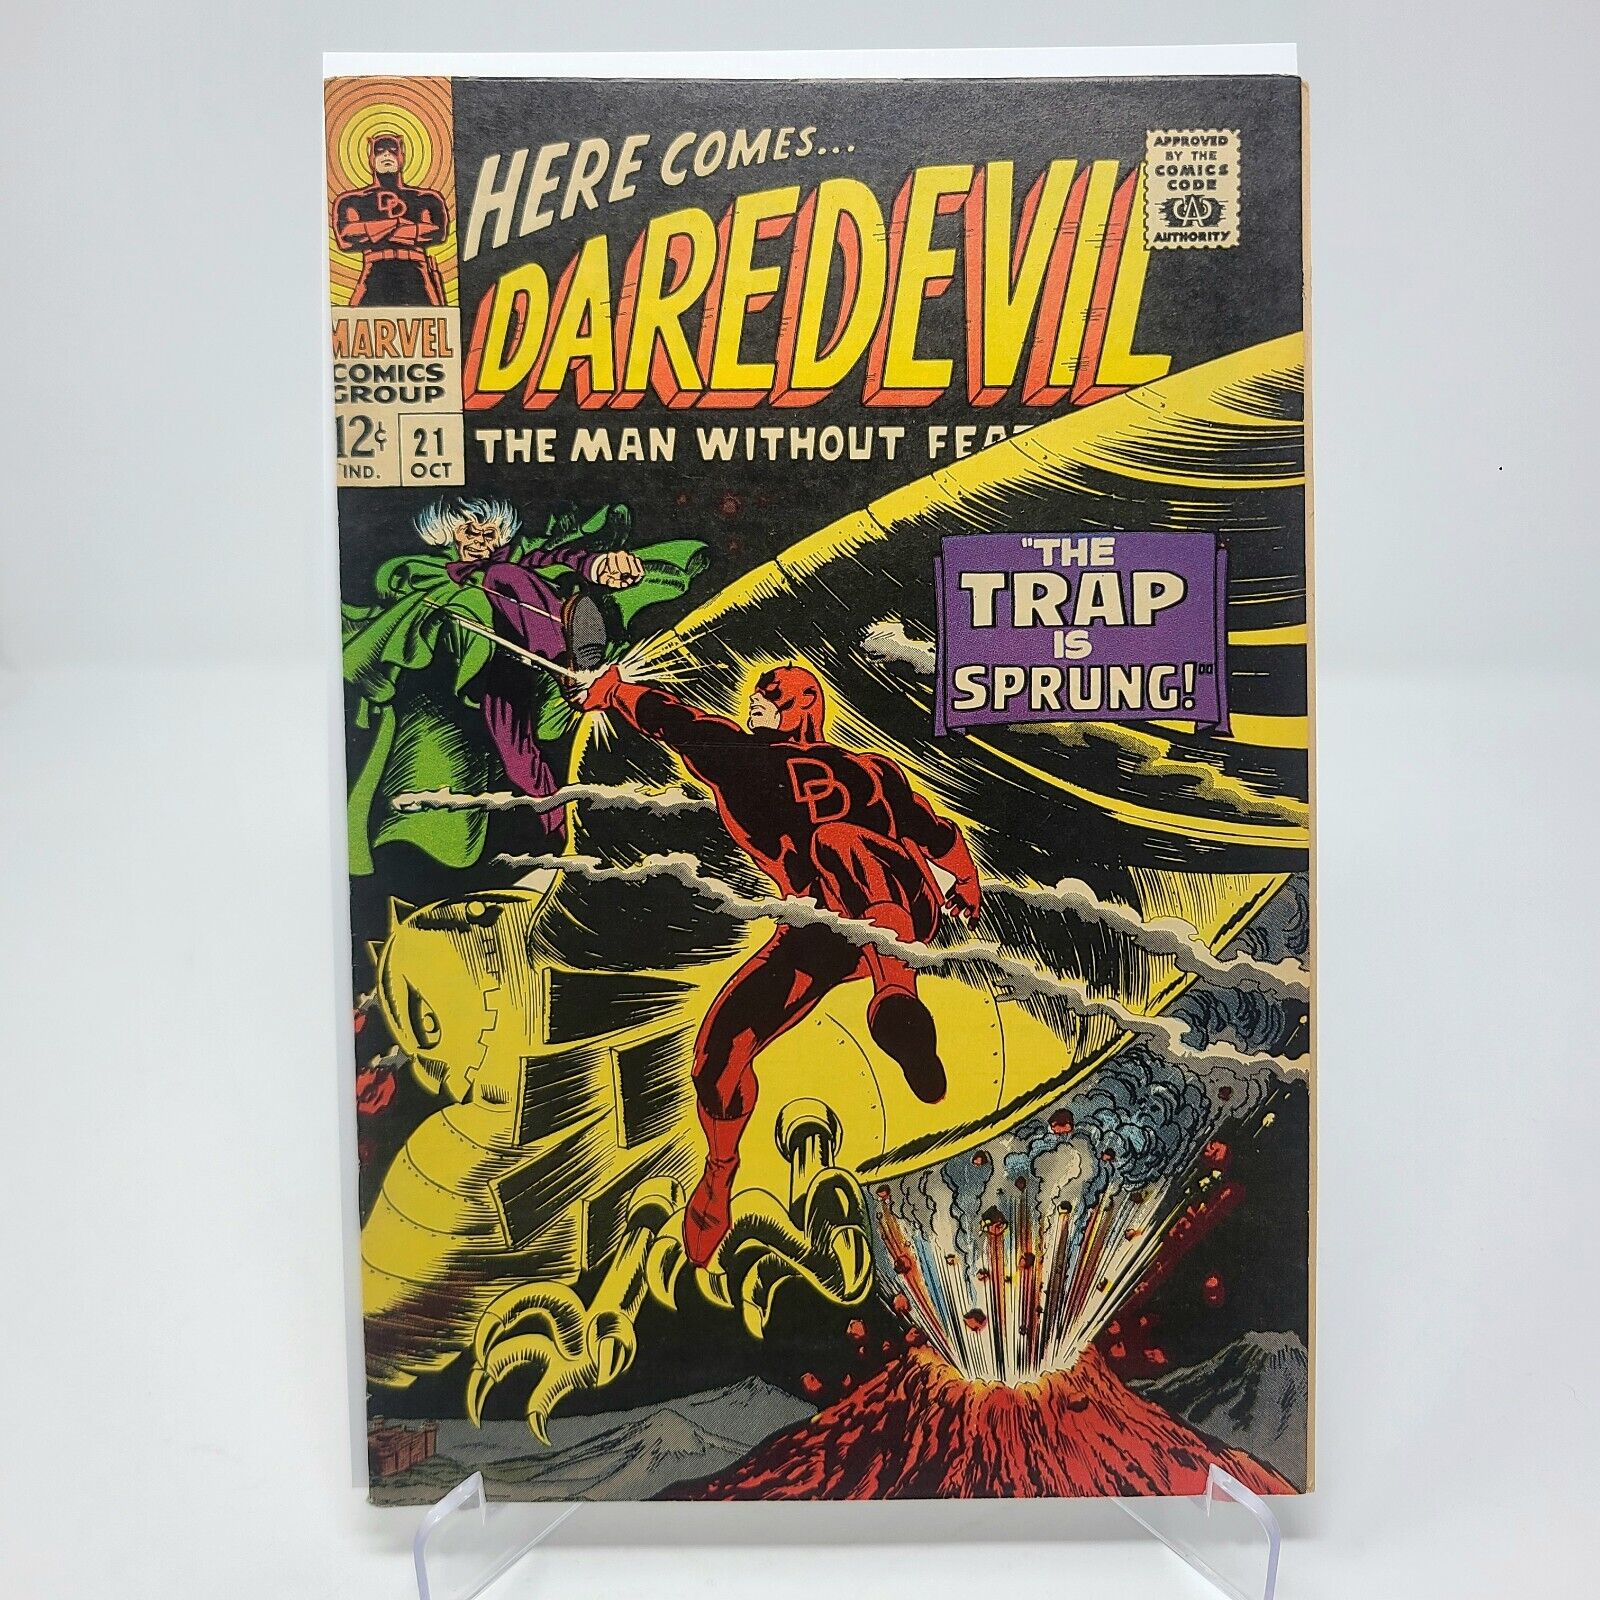 DAREDEVIL #21 1966 The OWL (VF-) BEAUTIFUL COPY COMBINED SHIPPING 